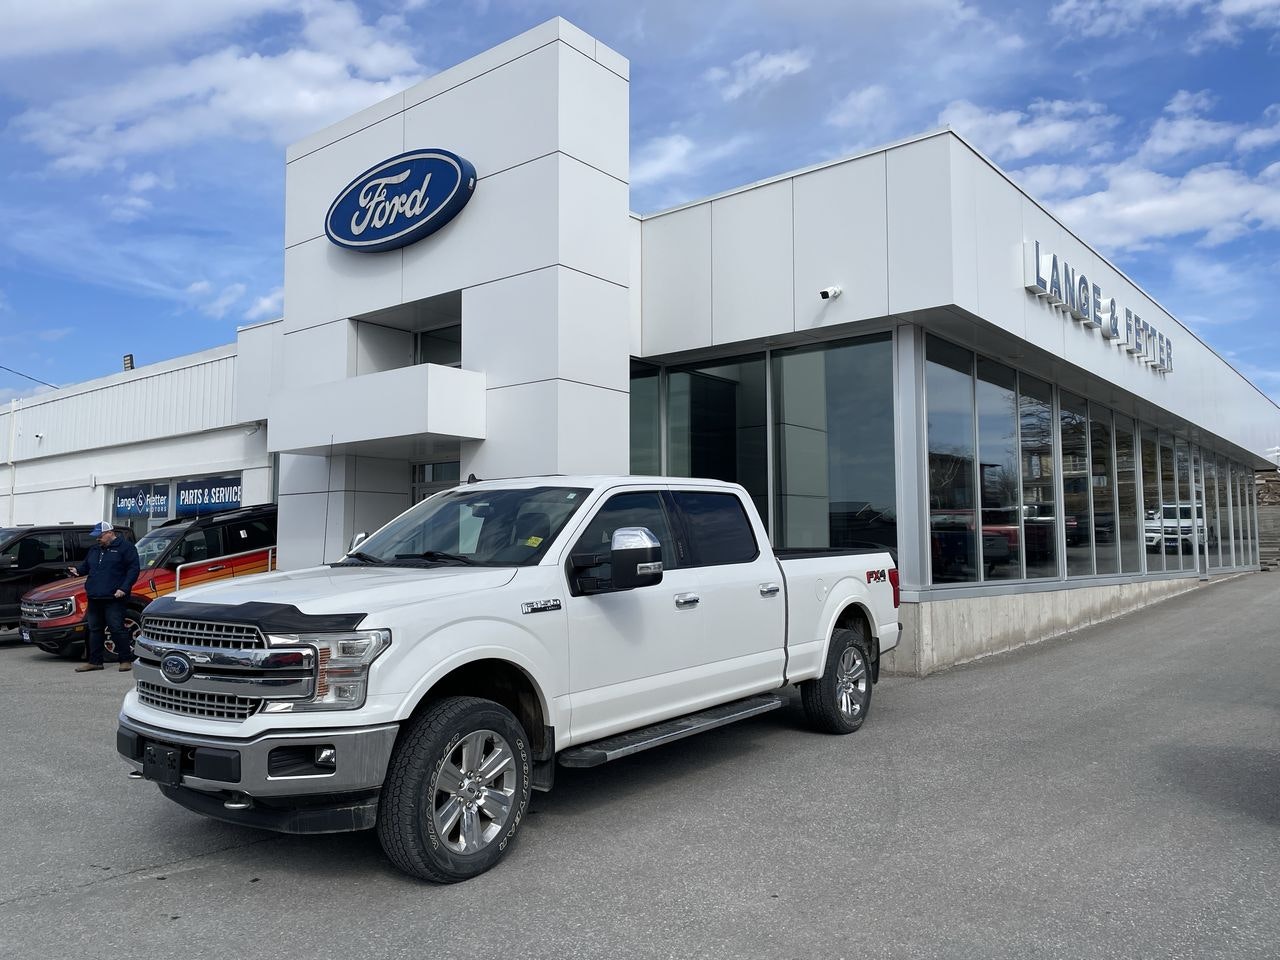 2019 Ford F-150 - 21510A Full Image 1